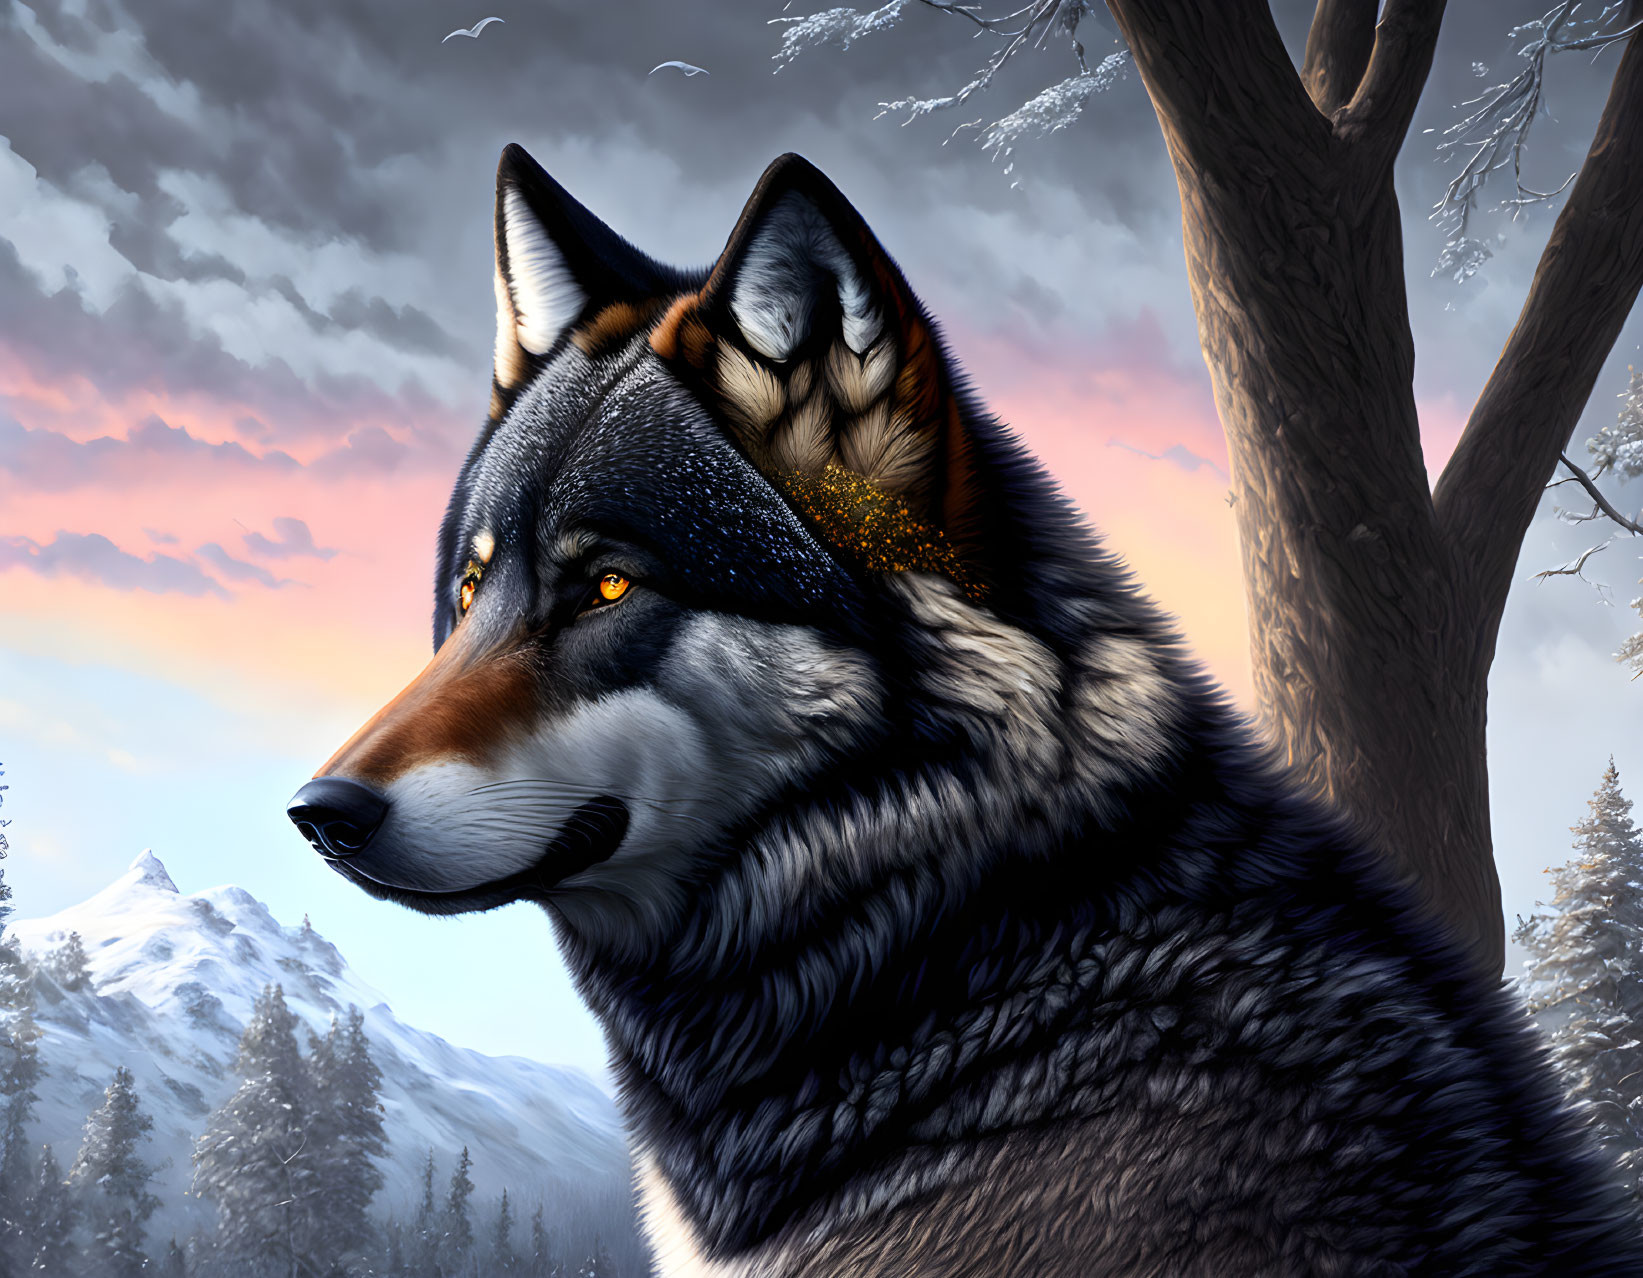 Detailed Wolf Illustration in Snowy Landscape with Mountains & Sunset Sky